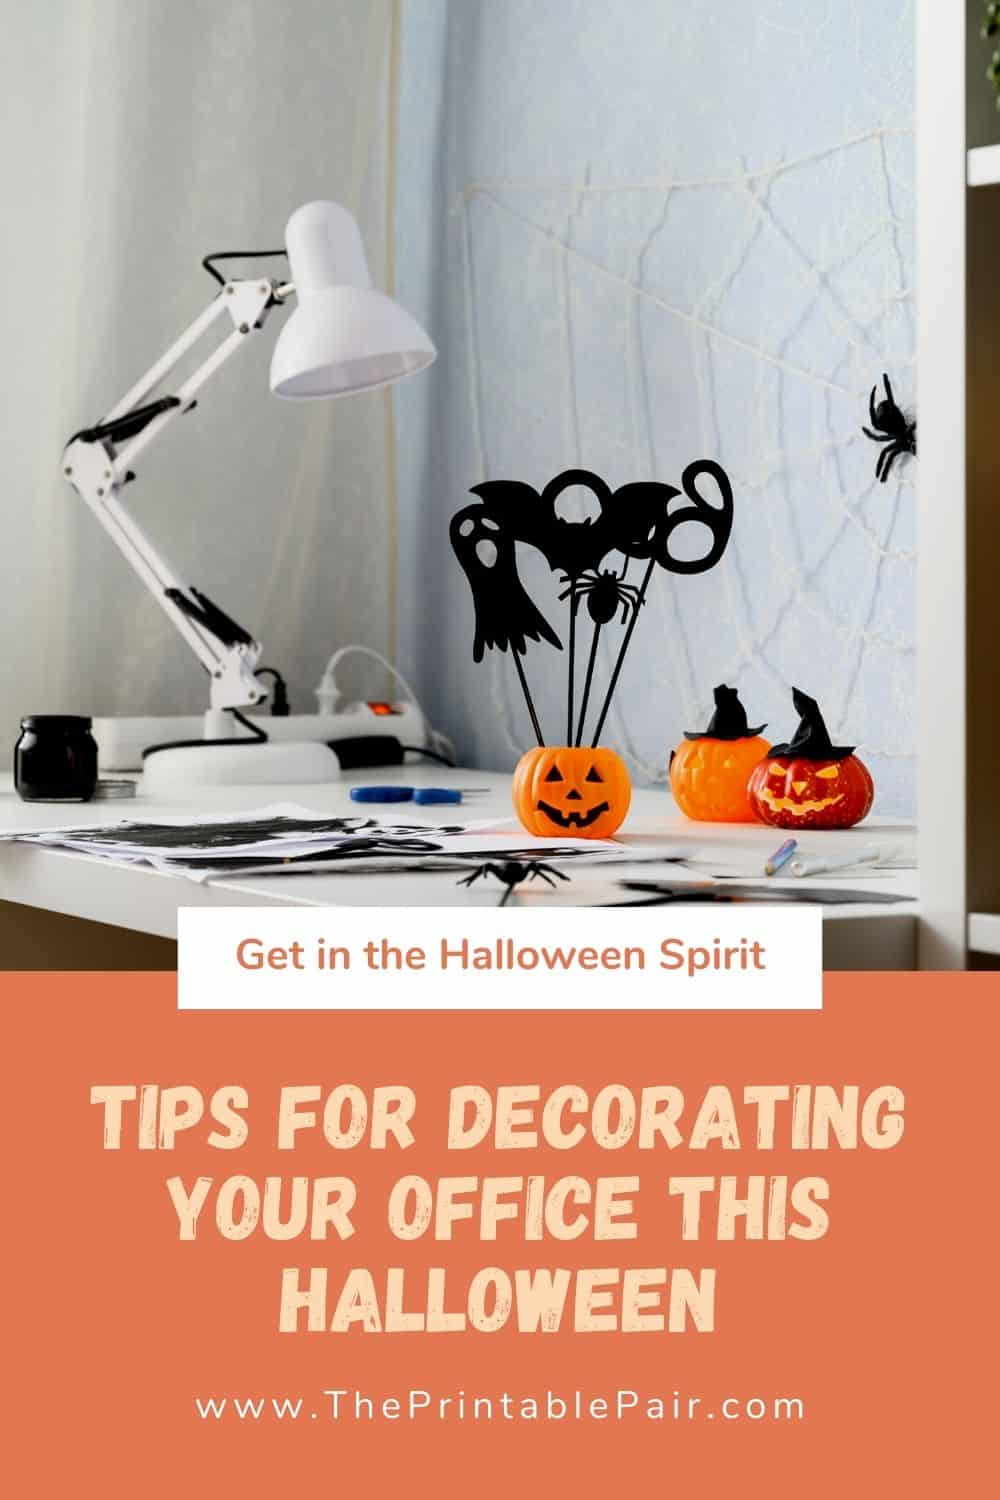 Three Office Decorating Tips to Get into the Spooky Halloween Spirit